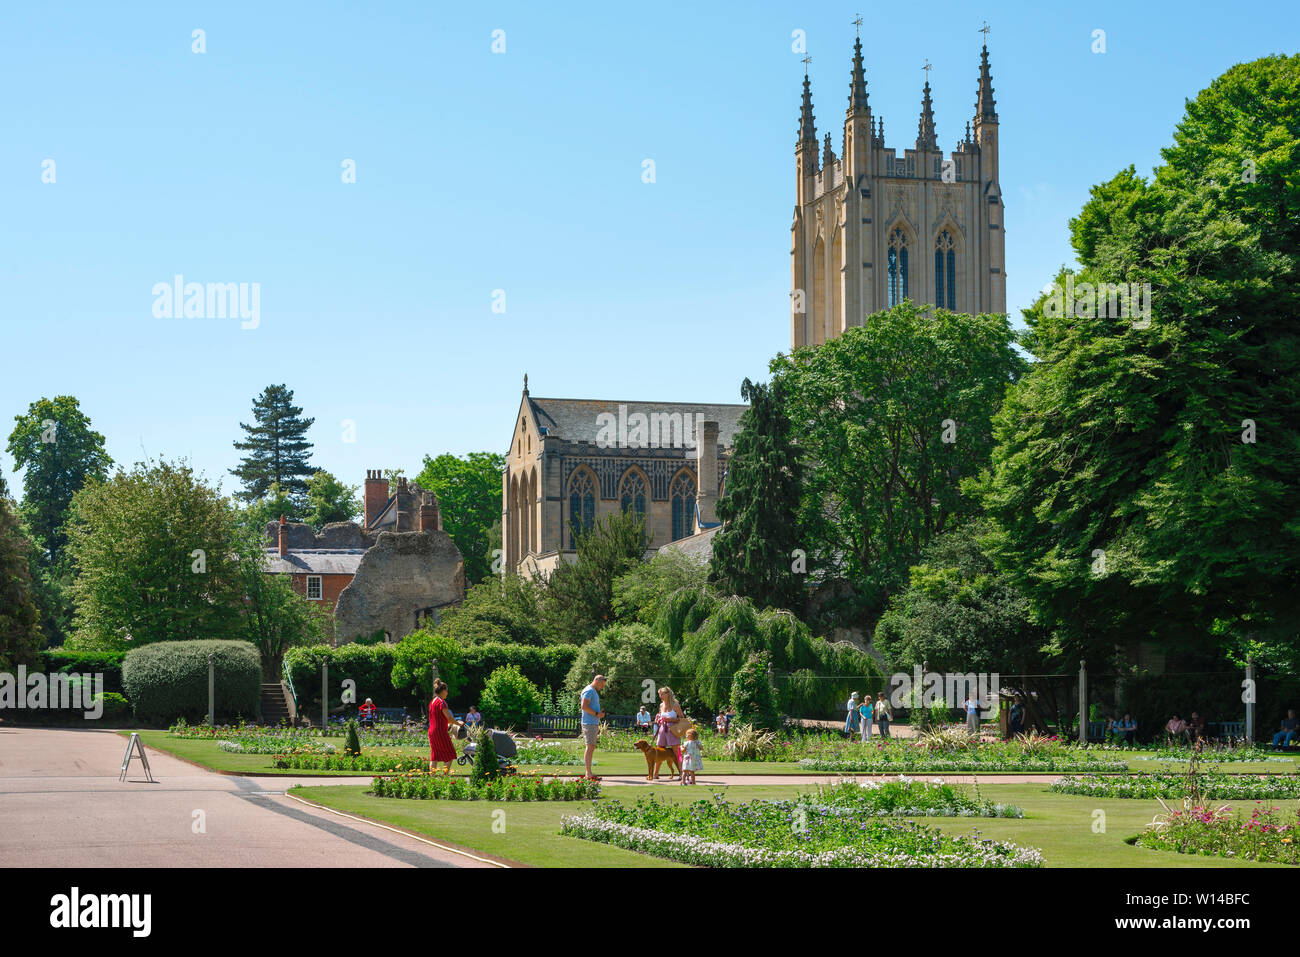 UK travel England, view in summer of the Abbey Gardens and tower of St Edmundsbury Cathedral in Bury St Edmunds, Suffolk, England, UK. Stock Photo